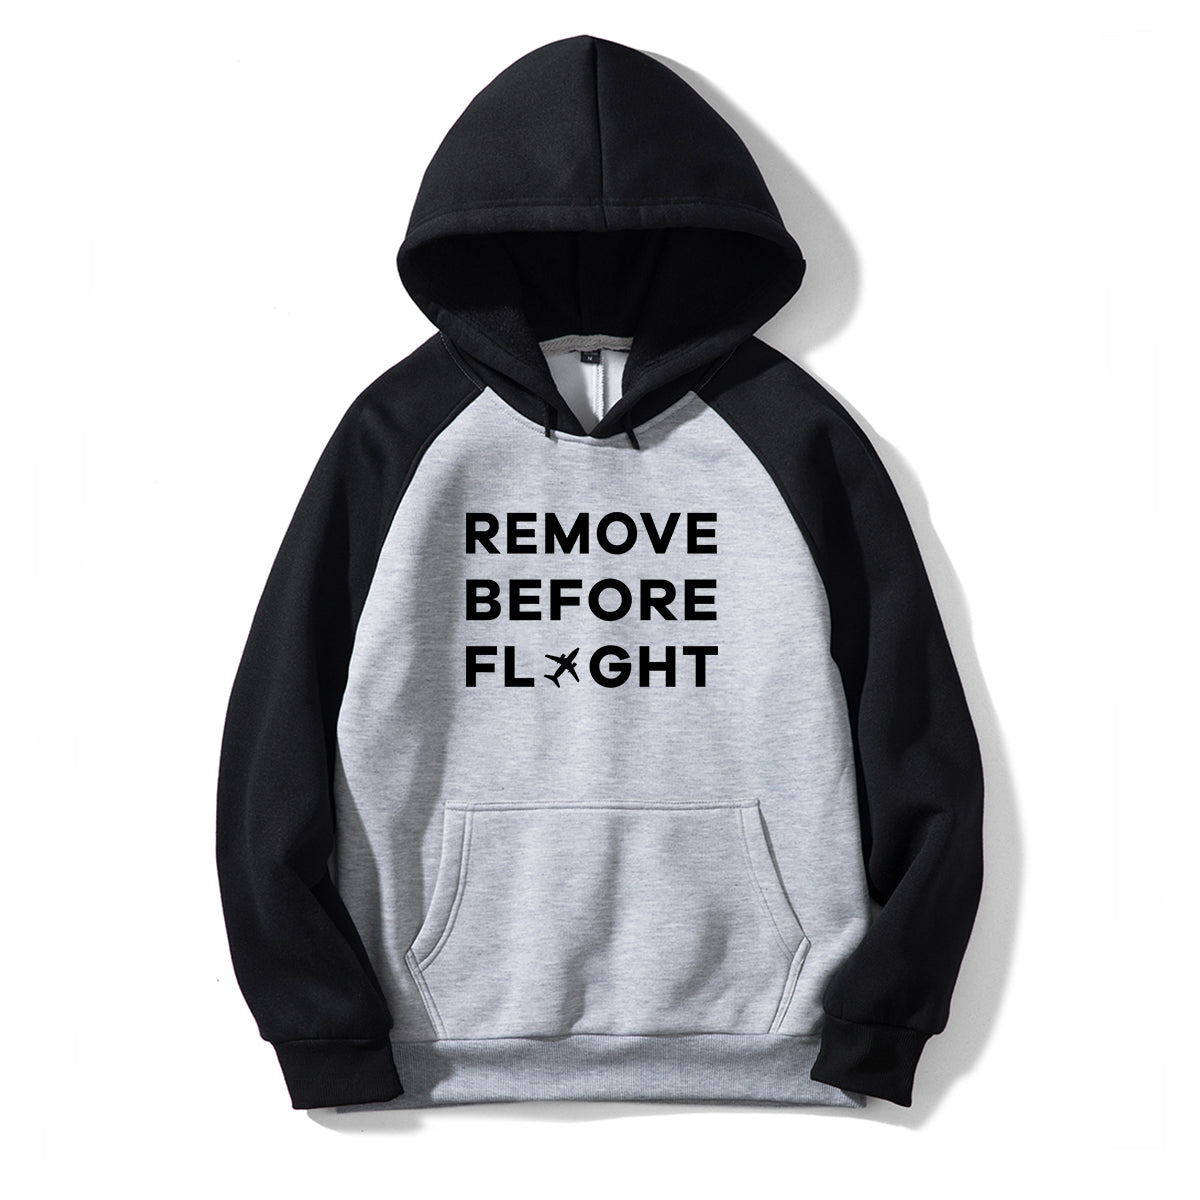 Remove Before Flight Designed Colourful Hoodies